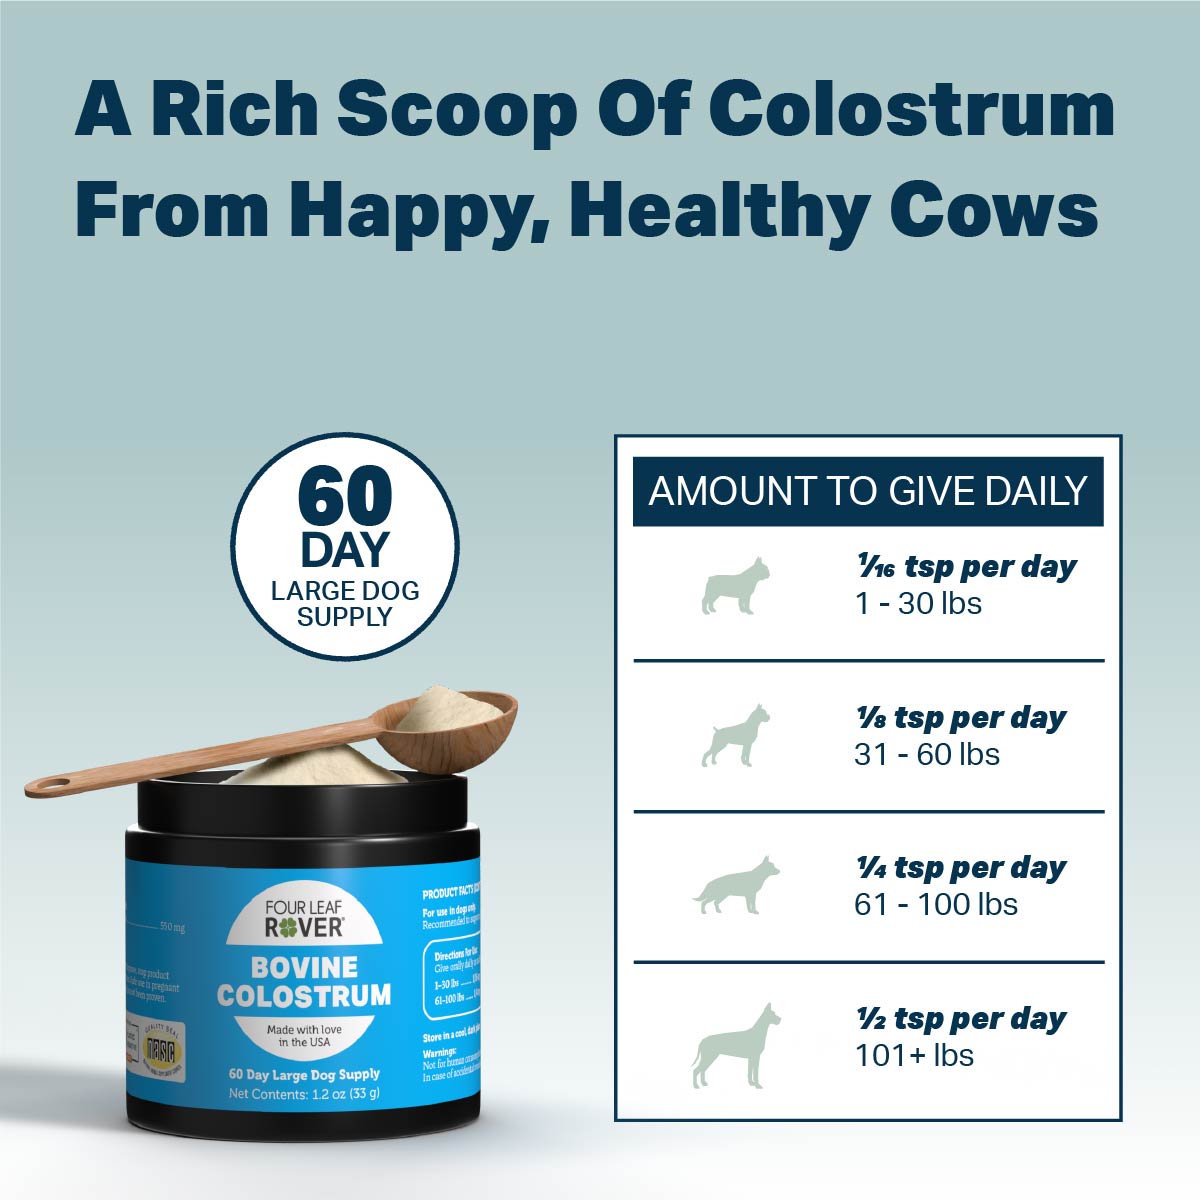 BOVINE COLOSTRUM - For Itchy Dogs